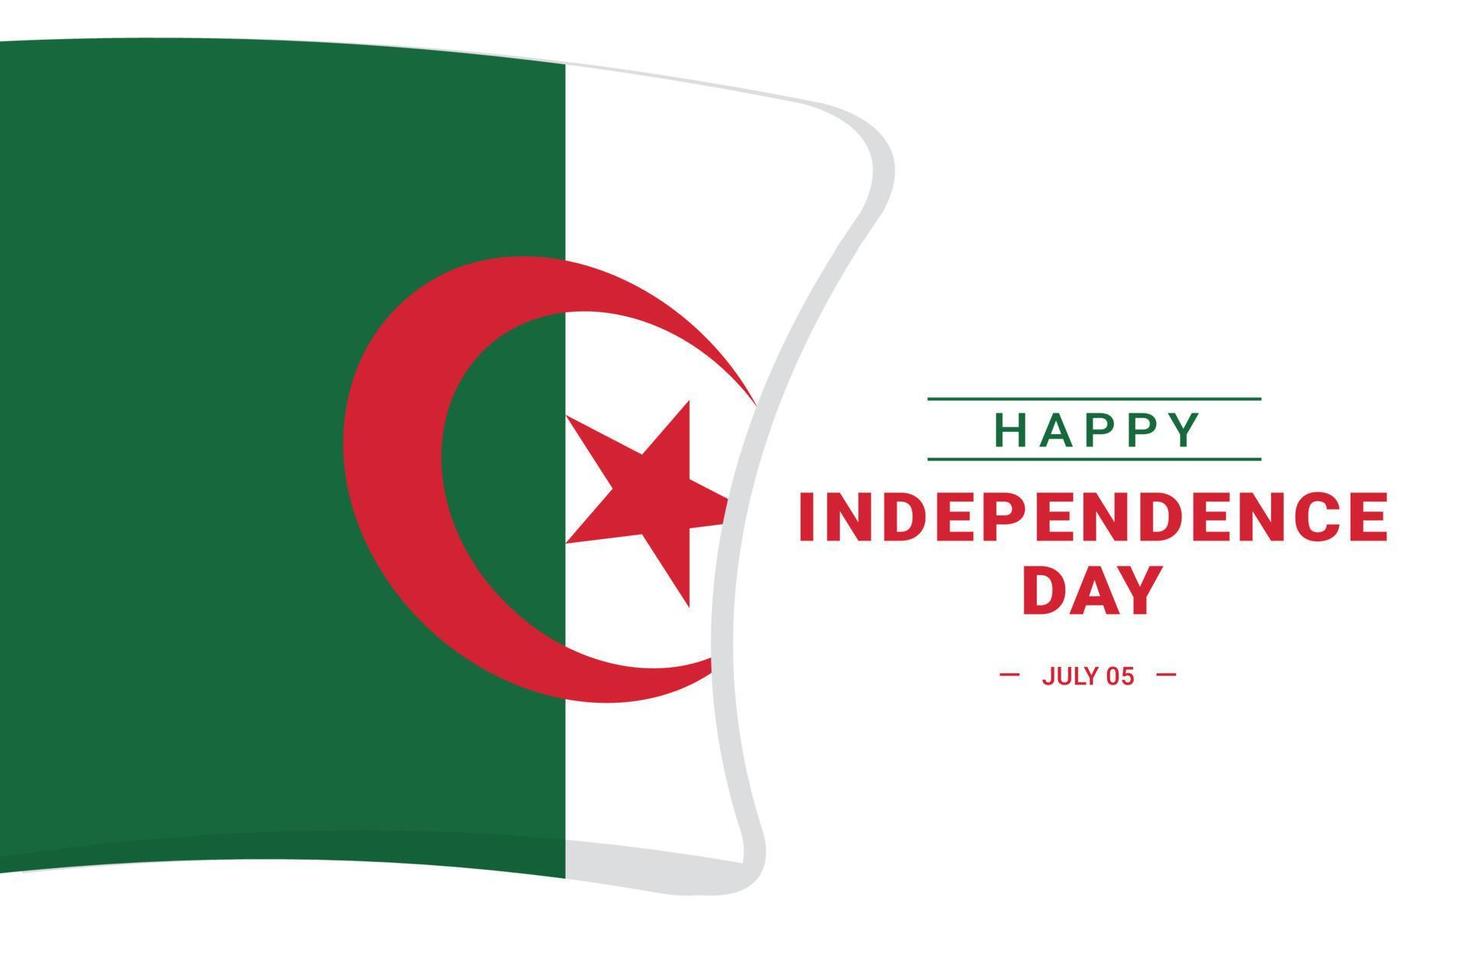 Algeria Independence Day vector